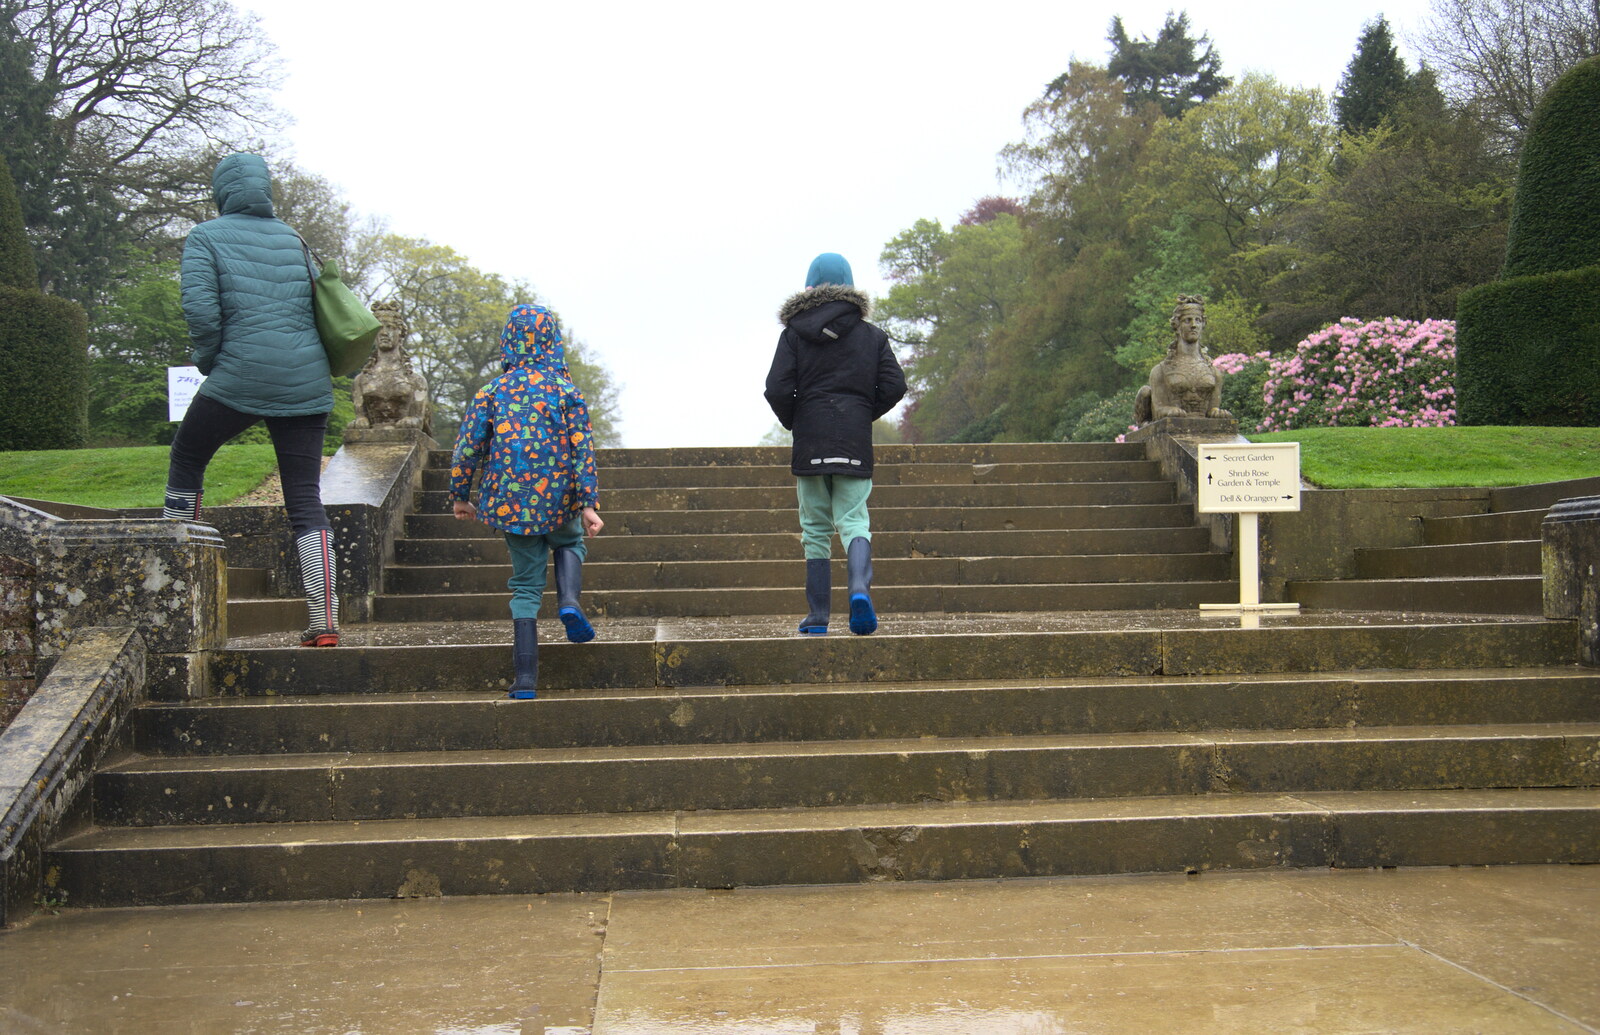 Walking up wet steps in wellies from A Trip to Blickling Hall, Aylsham, Norfolk - 29th April 2018